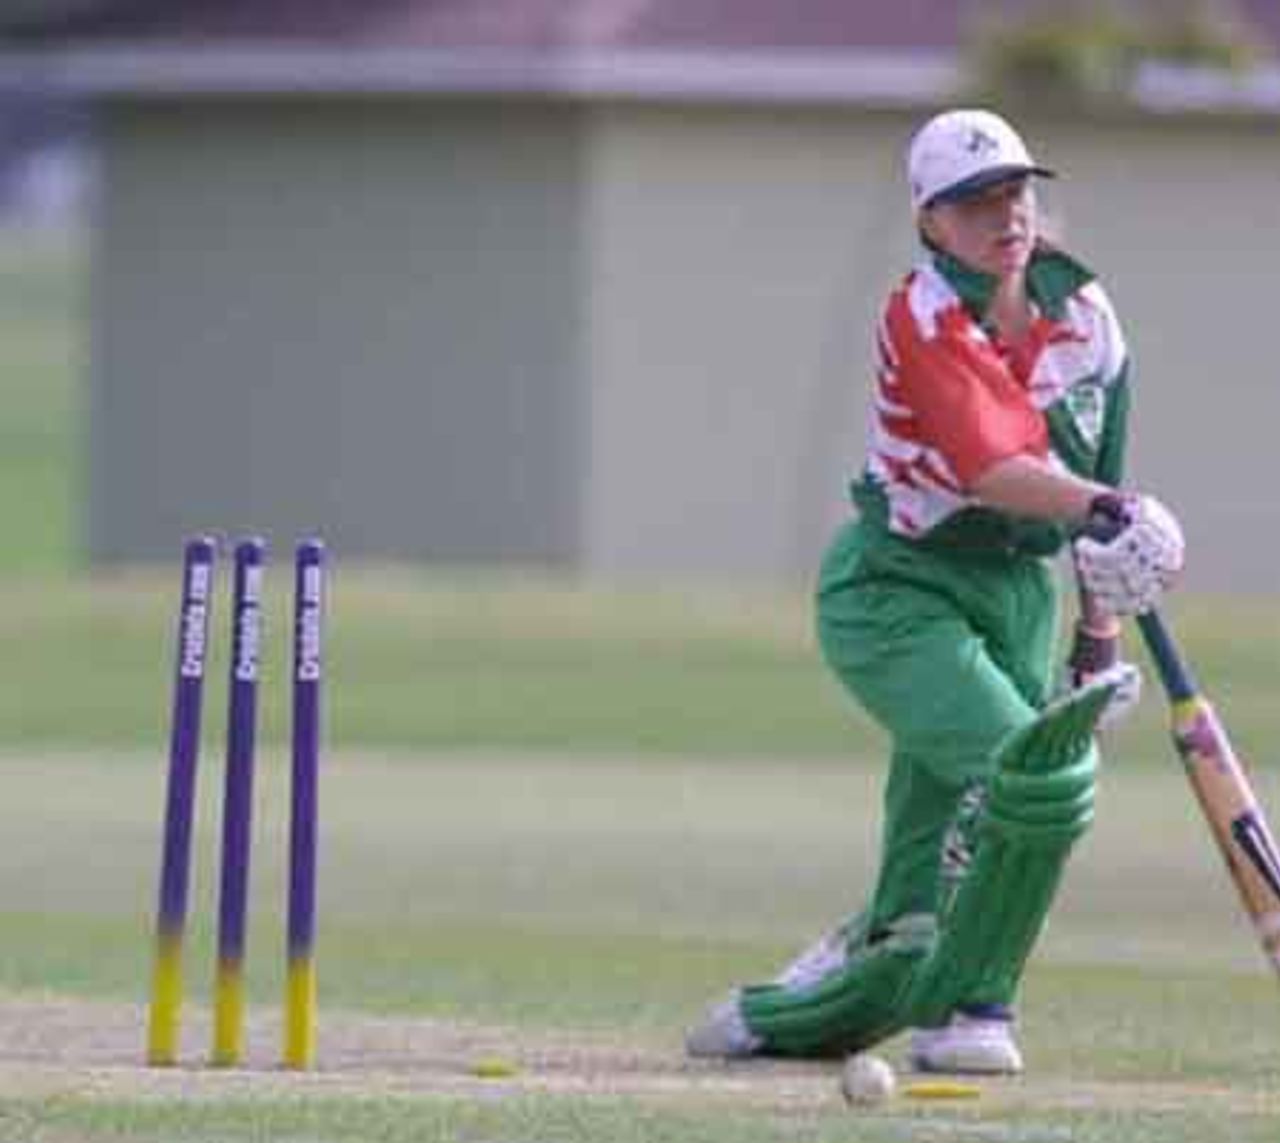 Ireland v India at the 2000 Women's World Cup , played at the Hagley Oval ,11th December